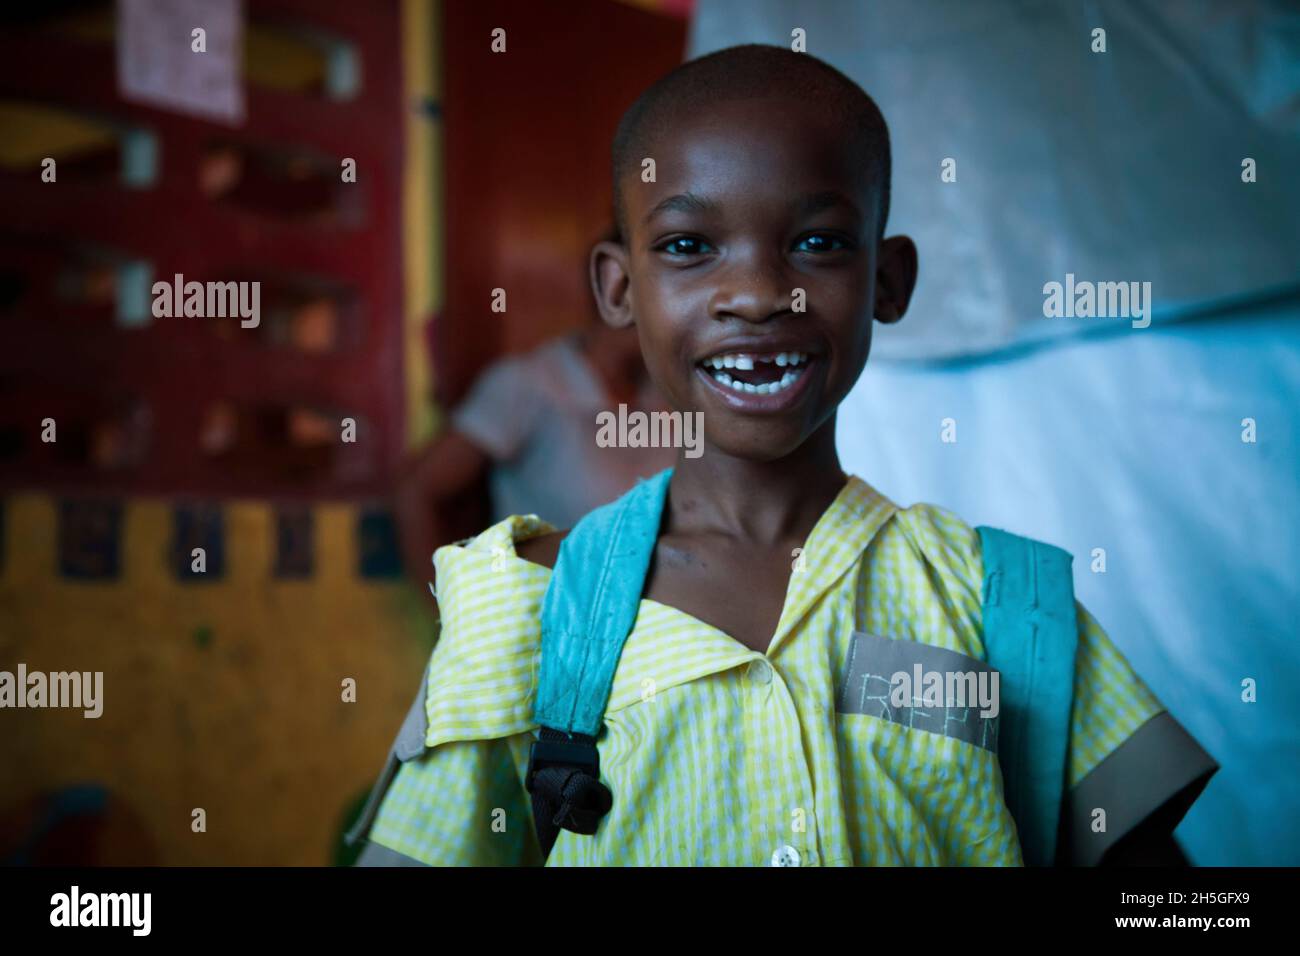 A young boy smiles in an orphanage. Stock Photo